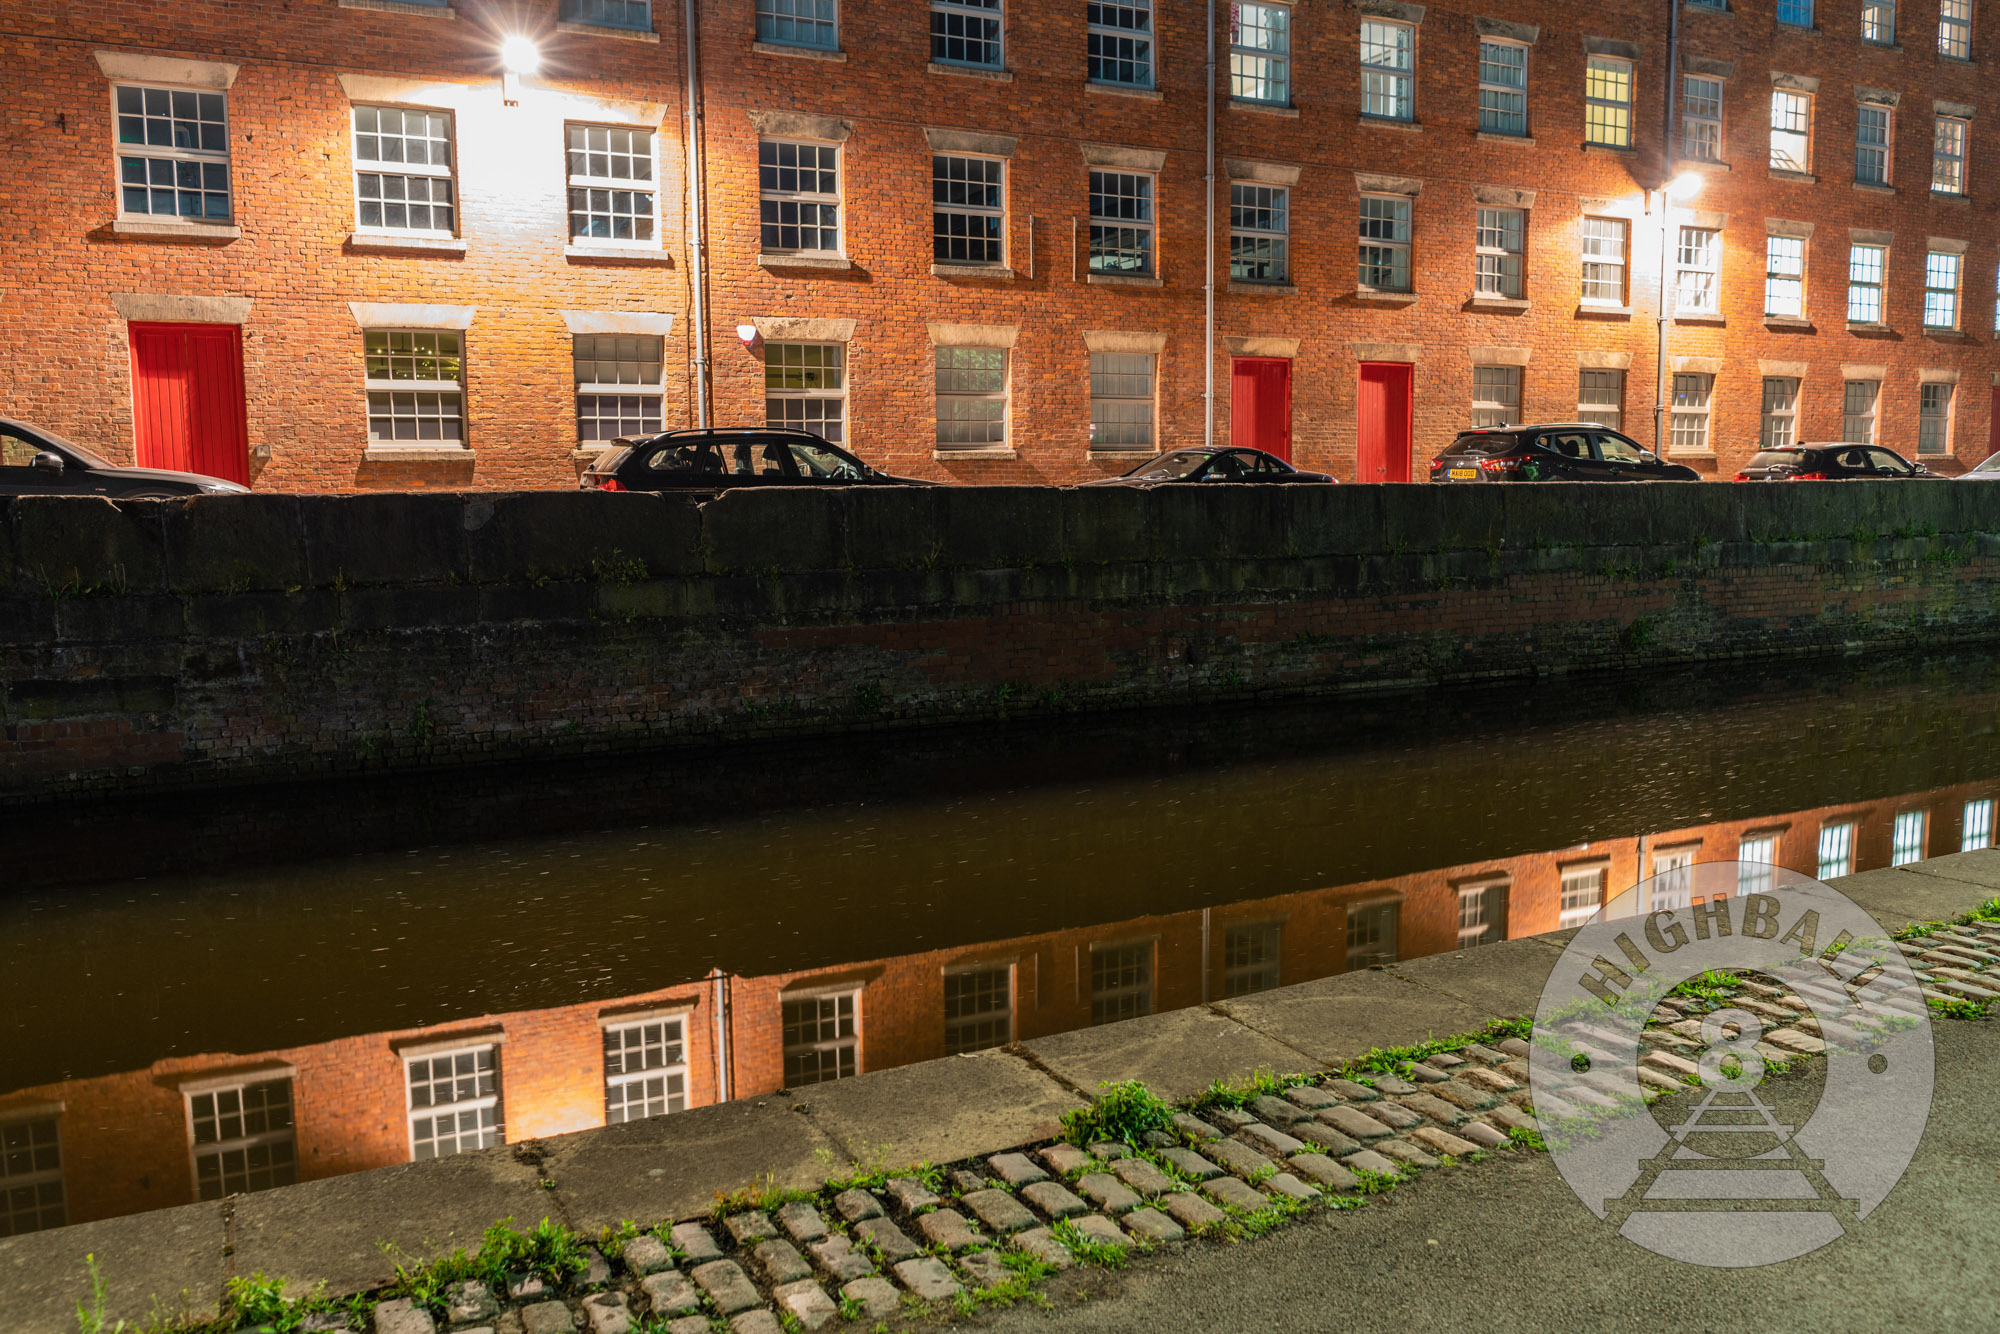 Rochdale Canal, Ancoats, Manchester, England, UK, 2018.